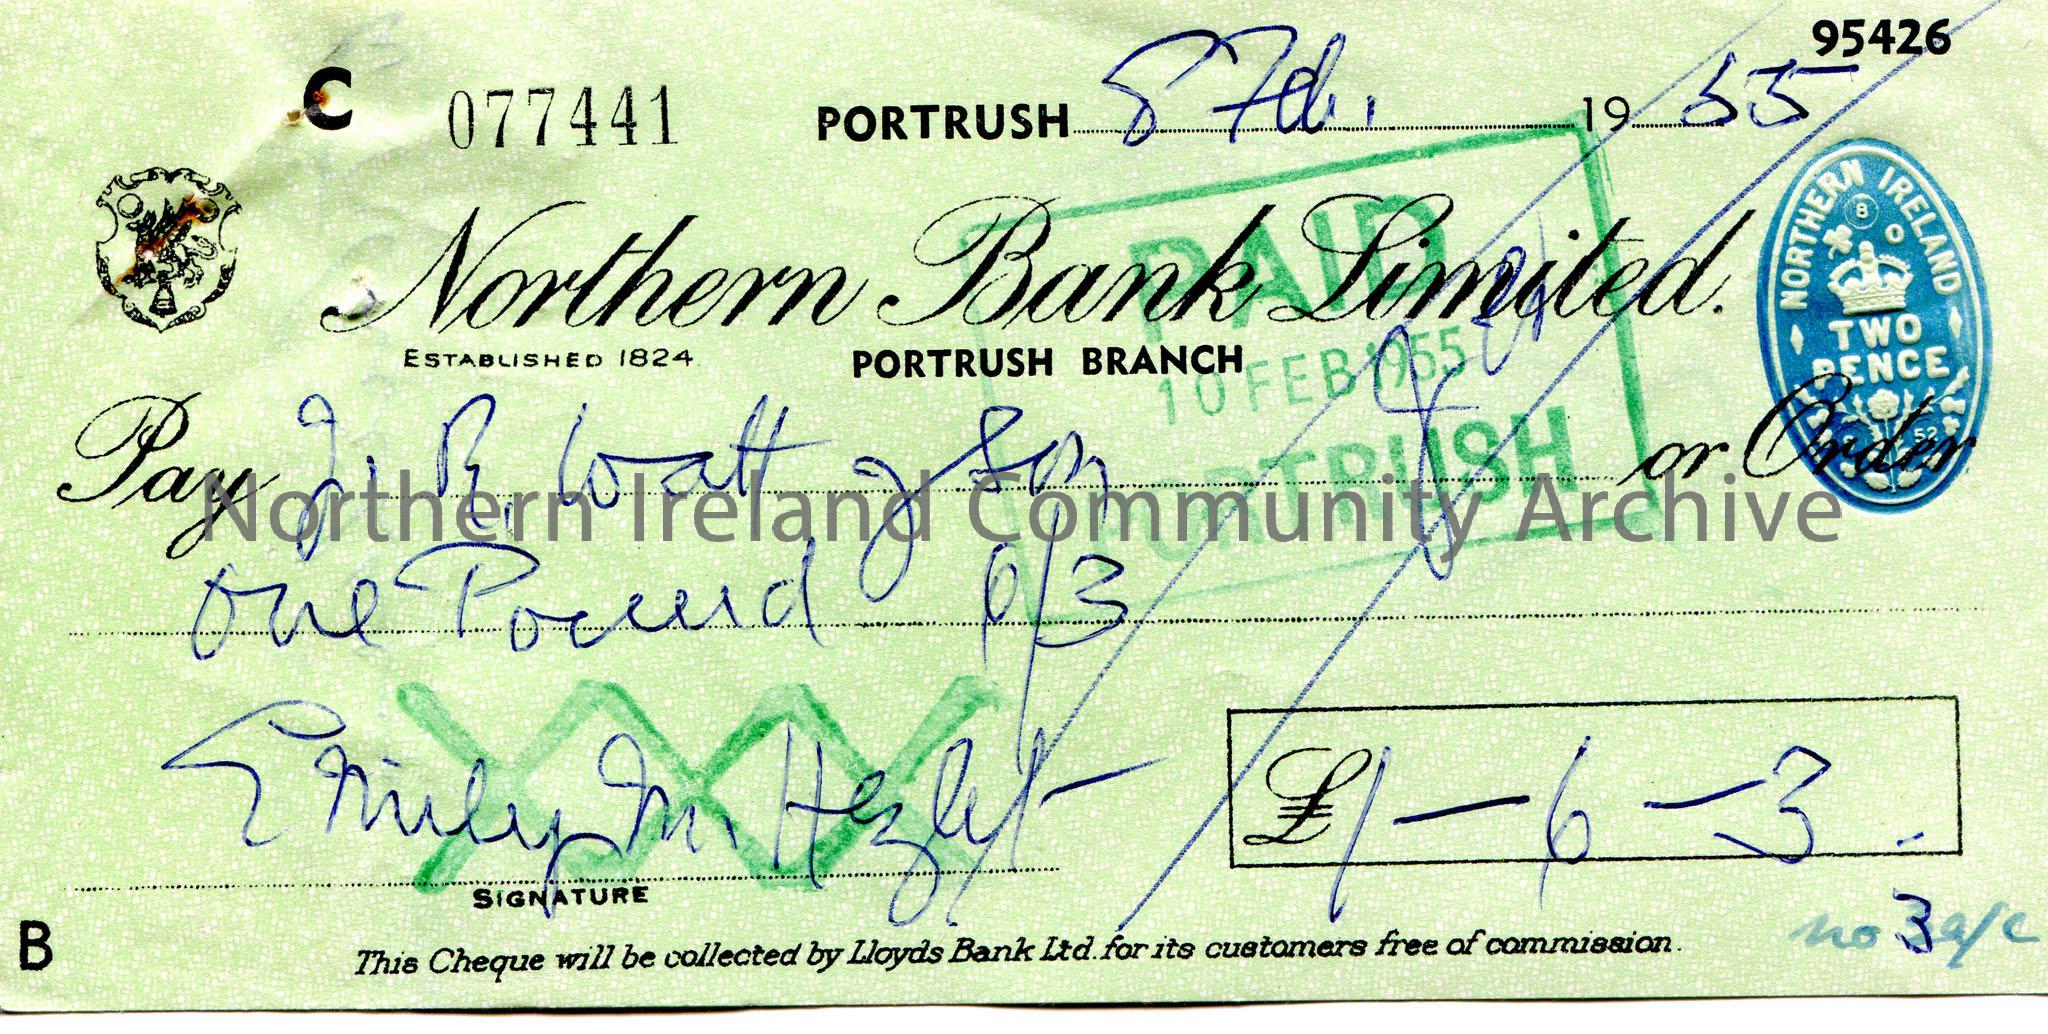 Northern Bank Limited, Portrush branch, cheque. Dated 8th February, 1955. Payable to J. R. Watt & Son from Emily M. Hezlet for £1.6.3. Scored out…